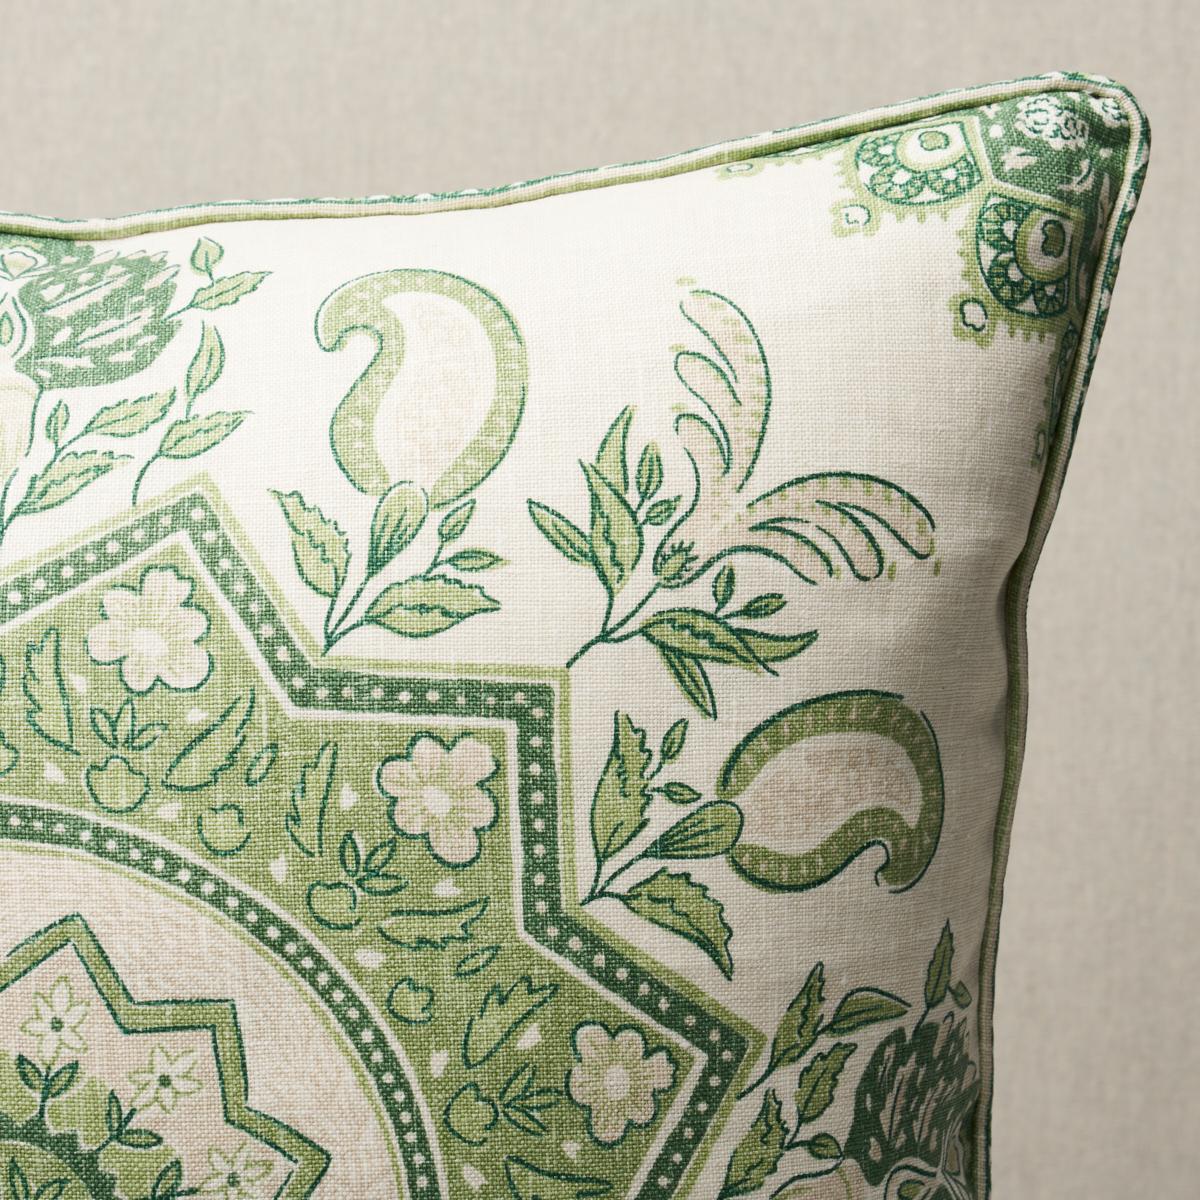 This pillow features Montecito Medallion by Mark D. Sikes for Schumacher with a self welt finish. This stunning large-scale medallion in leaf green evokes timeless motifs from India and Turkey for a chic, global vibe. Pillow includes a feather/down